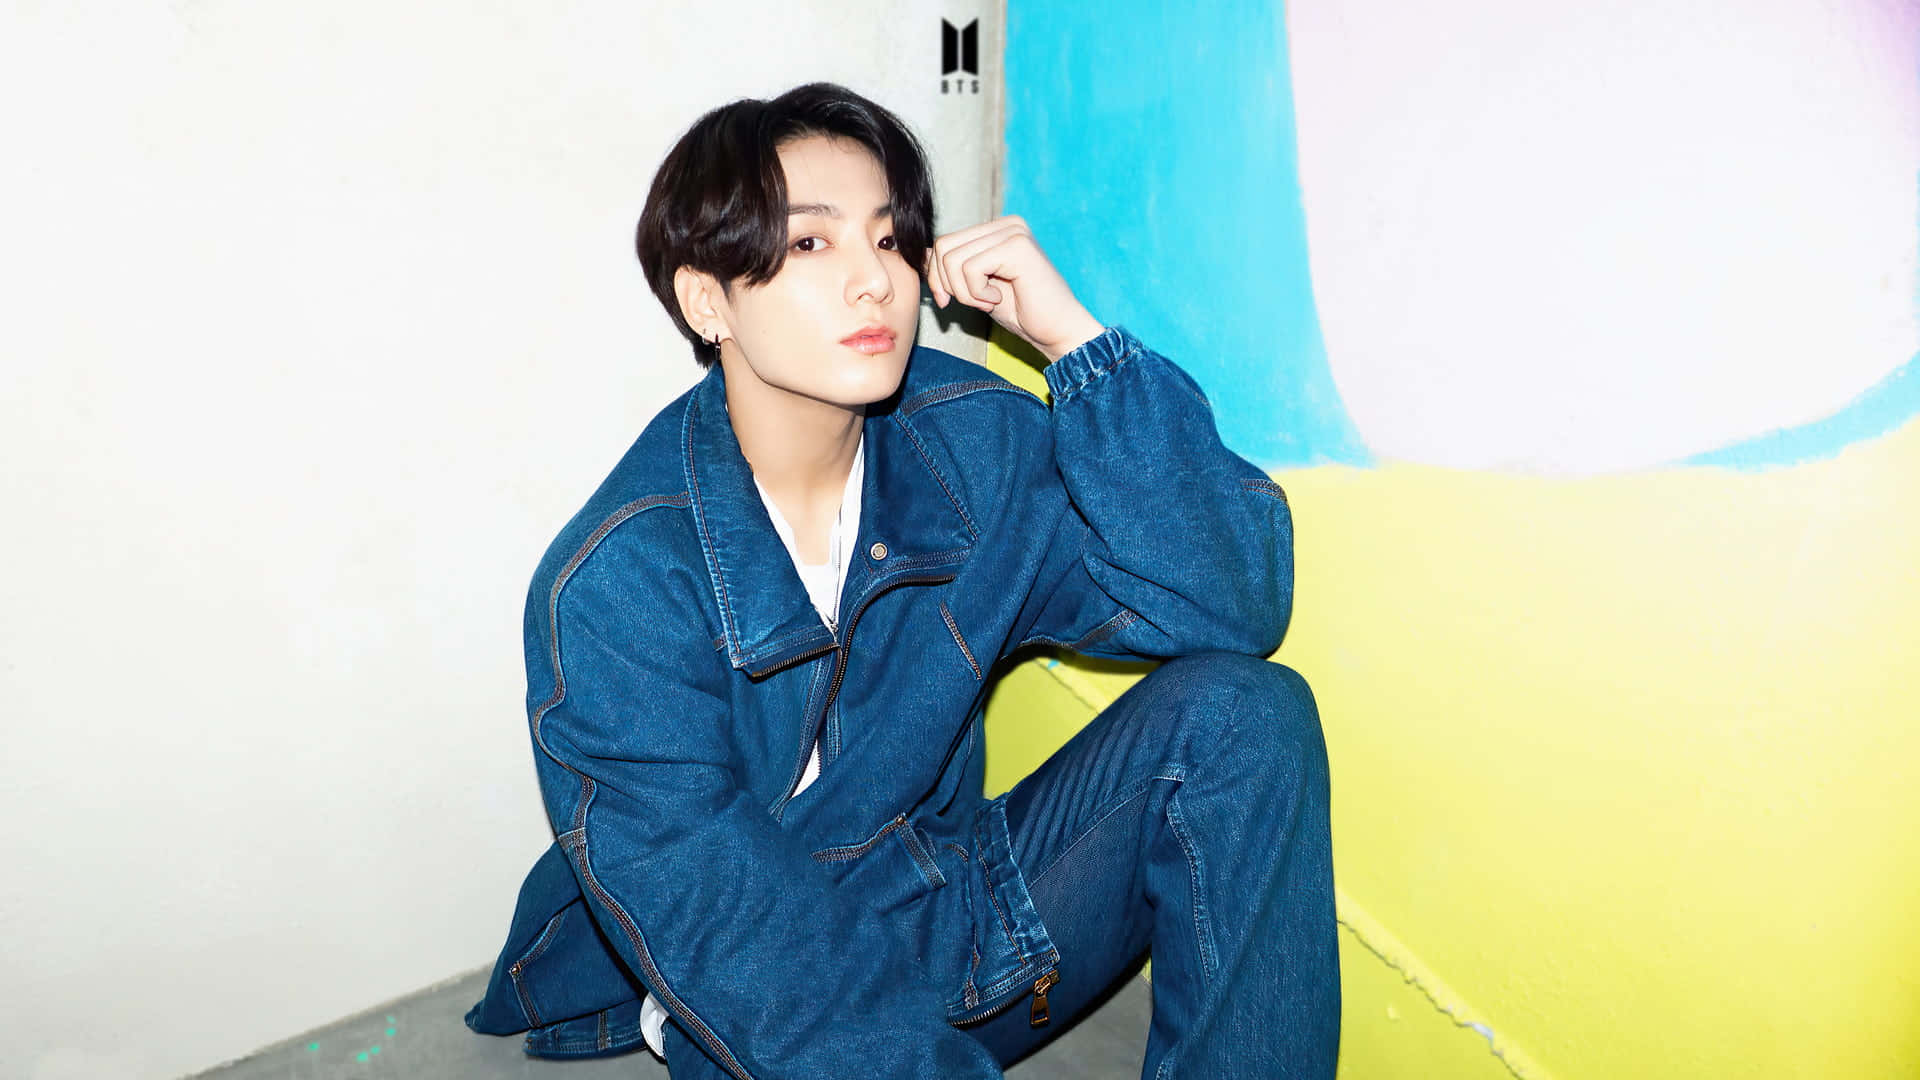 Jungkook striking a pose in a stylish outfit